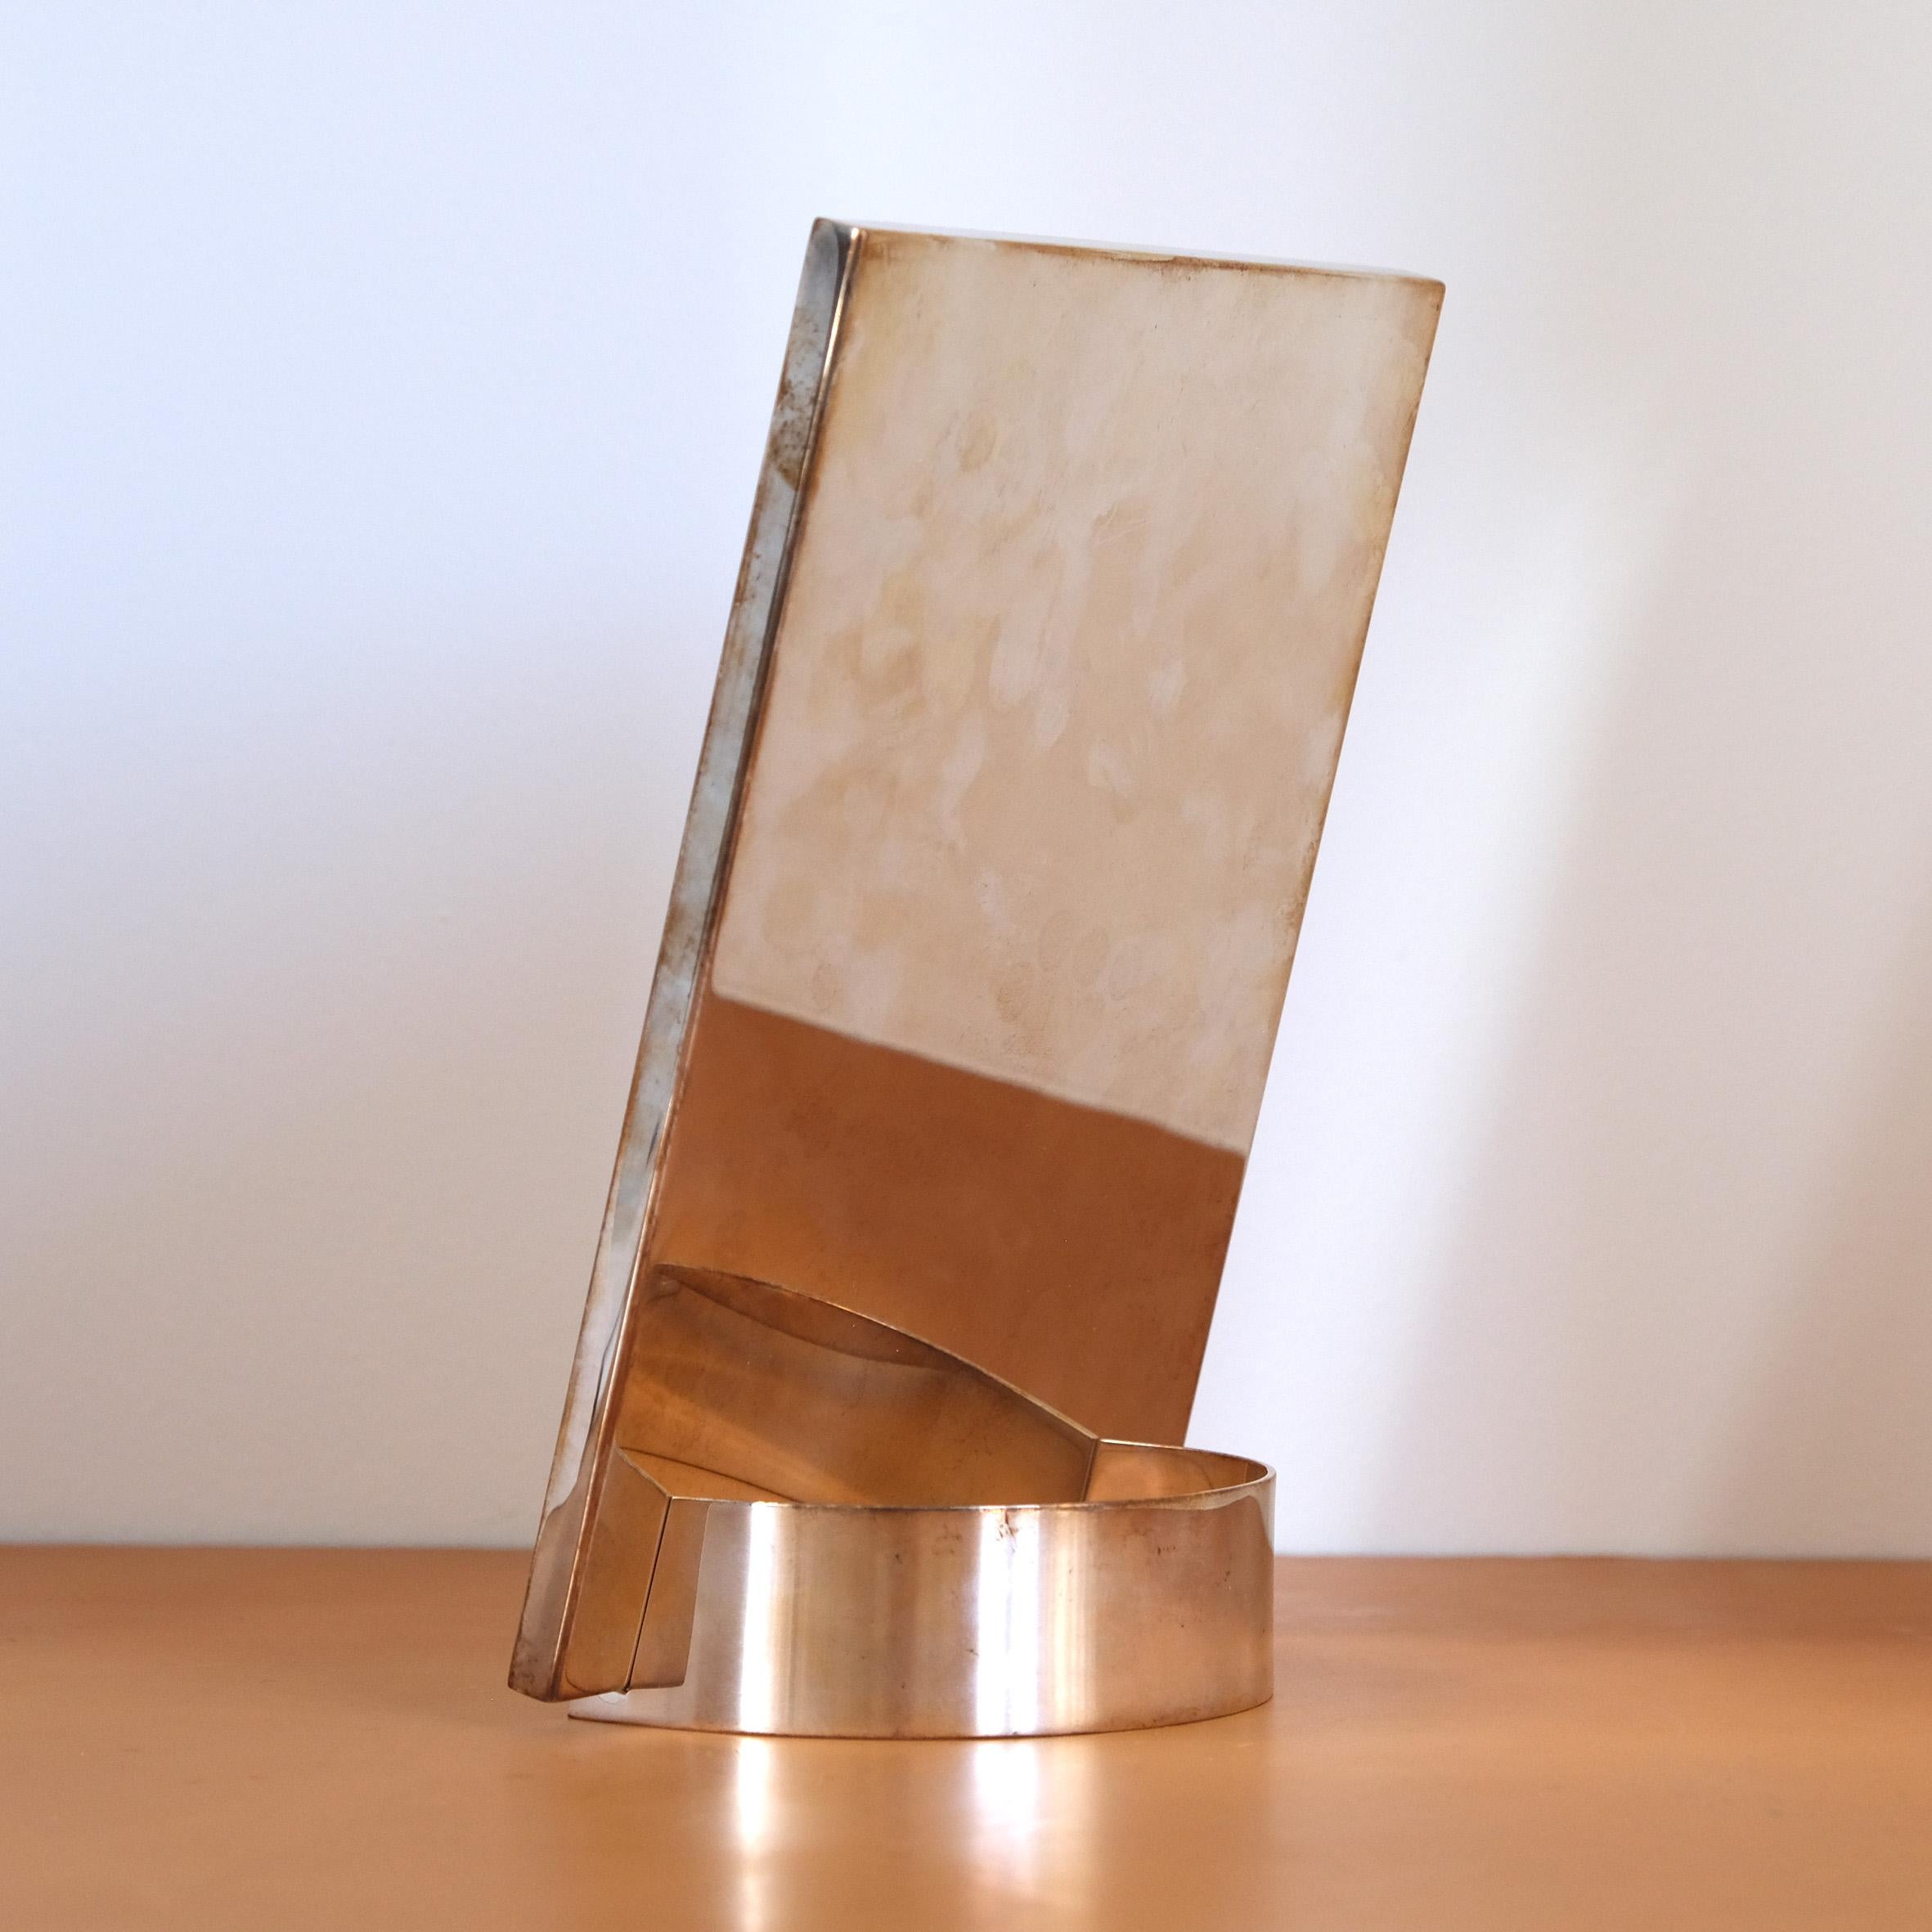 Martin Szekely

Radius

A silvered metal rectangular mirror on a half-cylinder stand.
The stand stamped « Christofle » and signed « m.Szekely ».
Produced by Christofle, France.
Circa 2006.


Martin Szekely

One of the most important